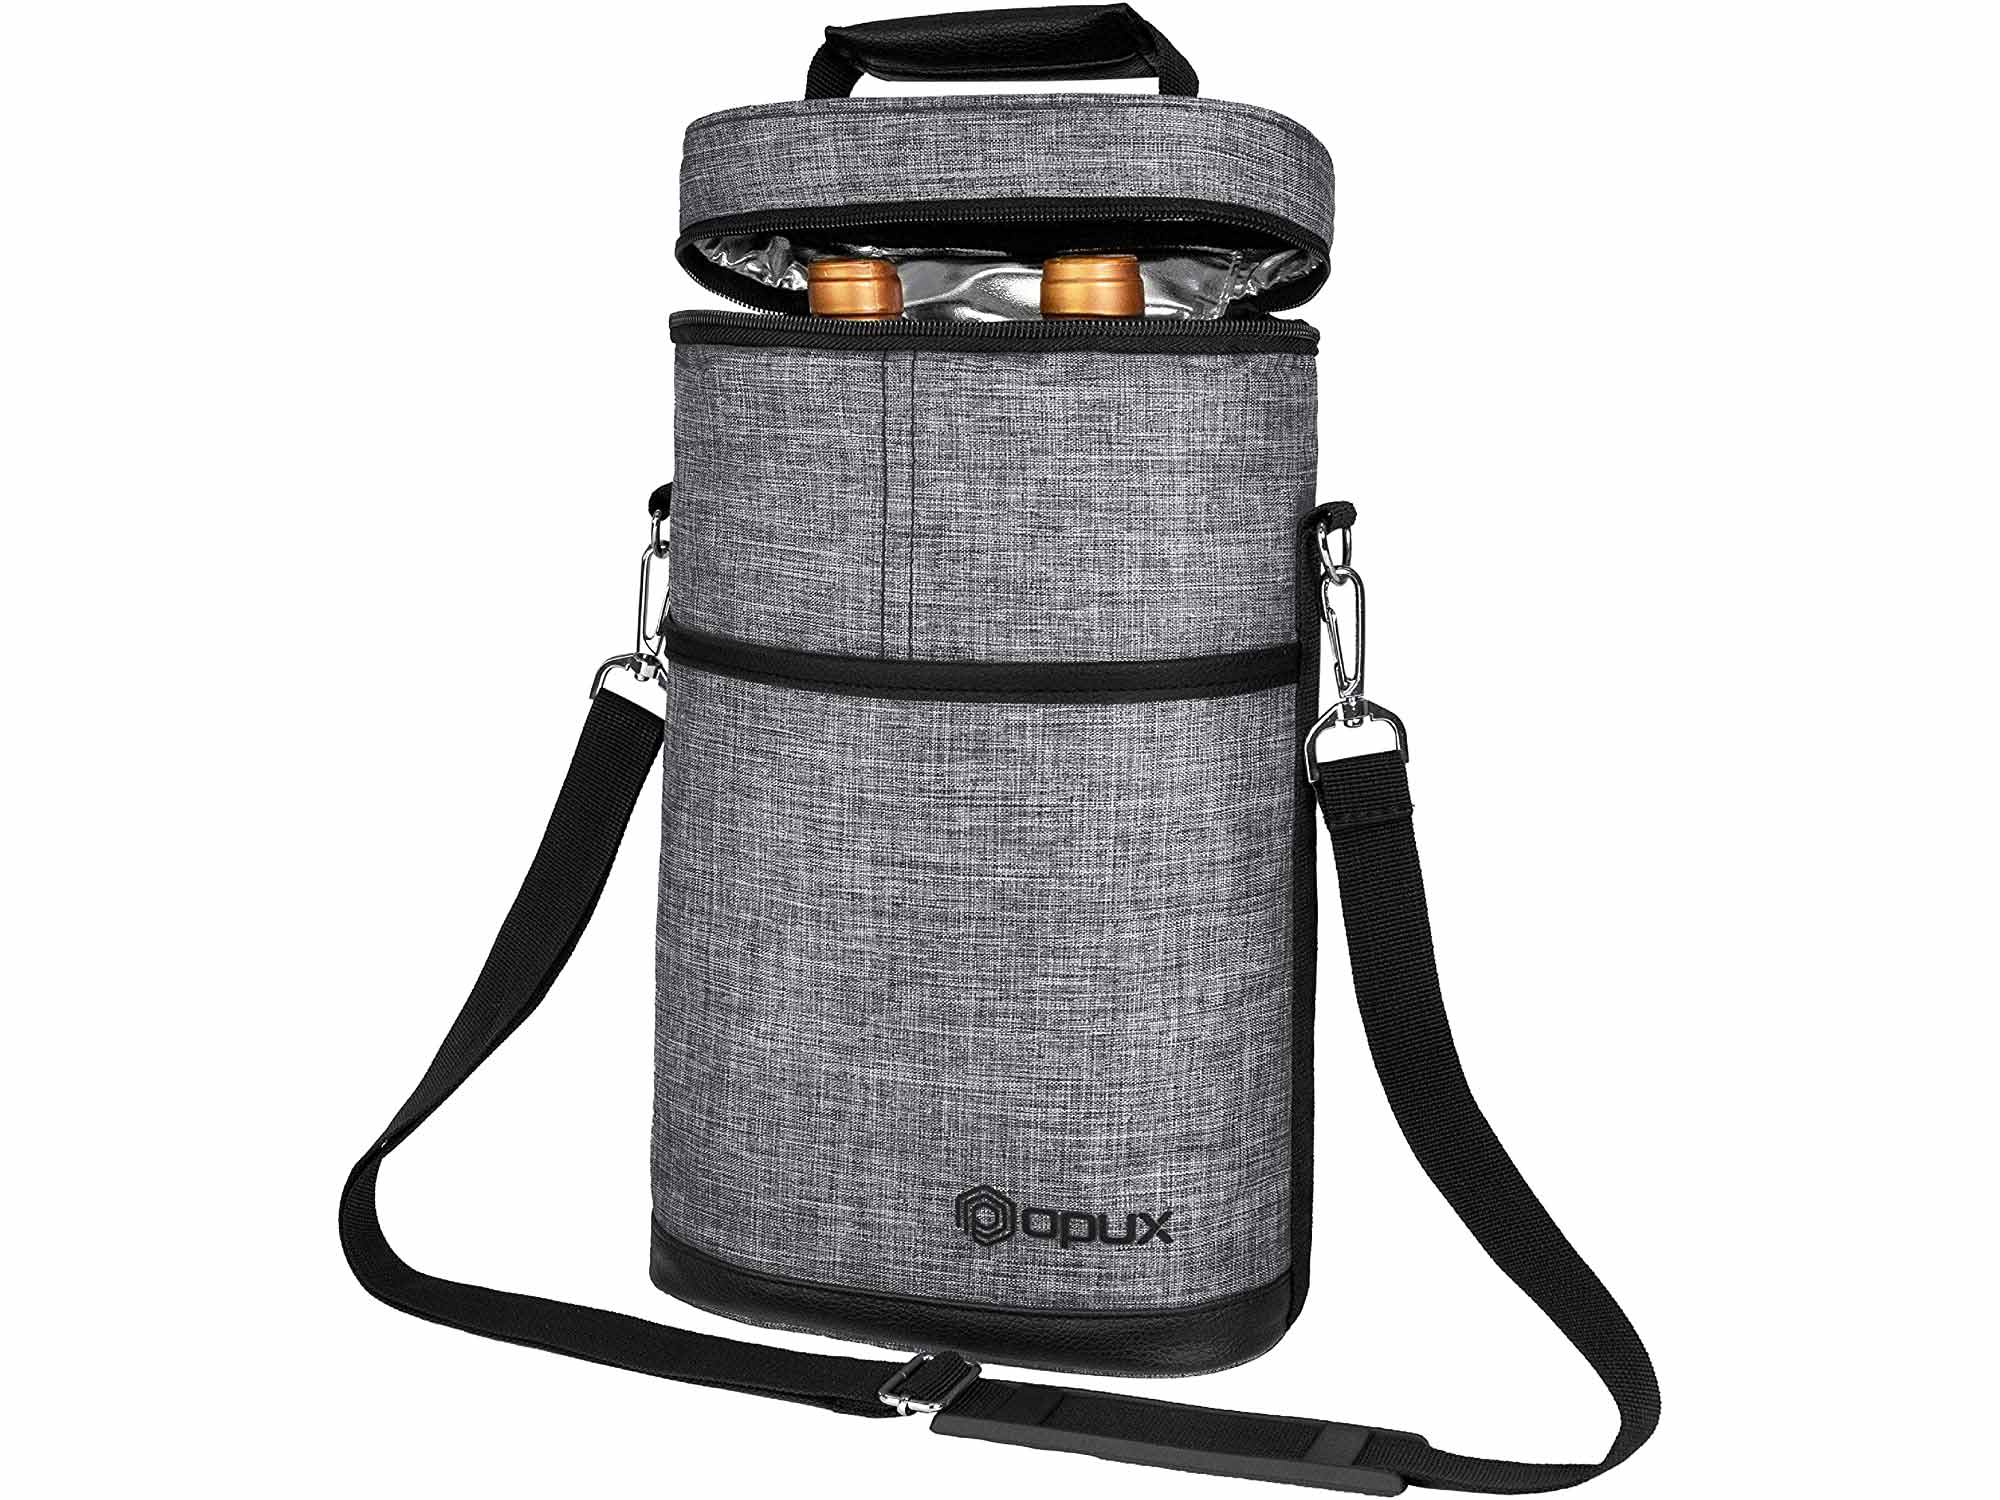 OPUX 2 Bottle Wine Tote Carrier